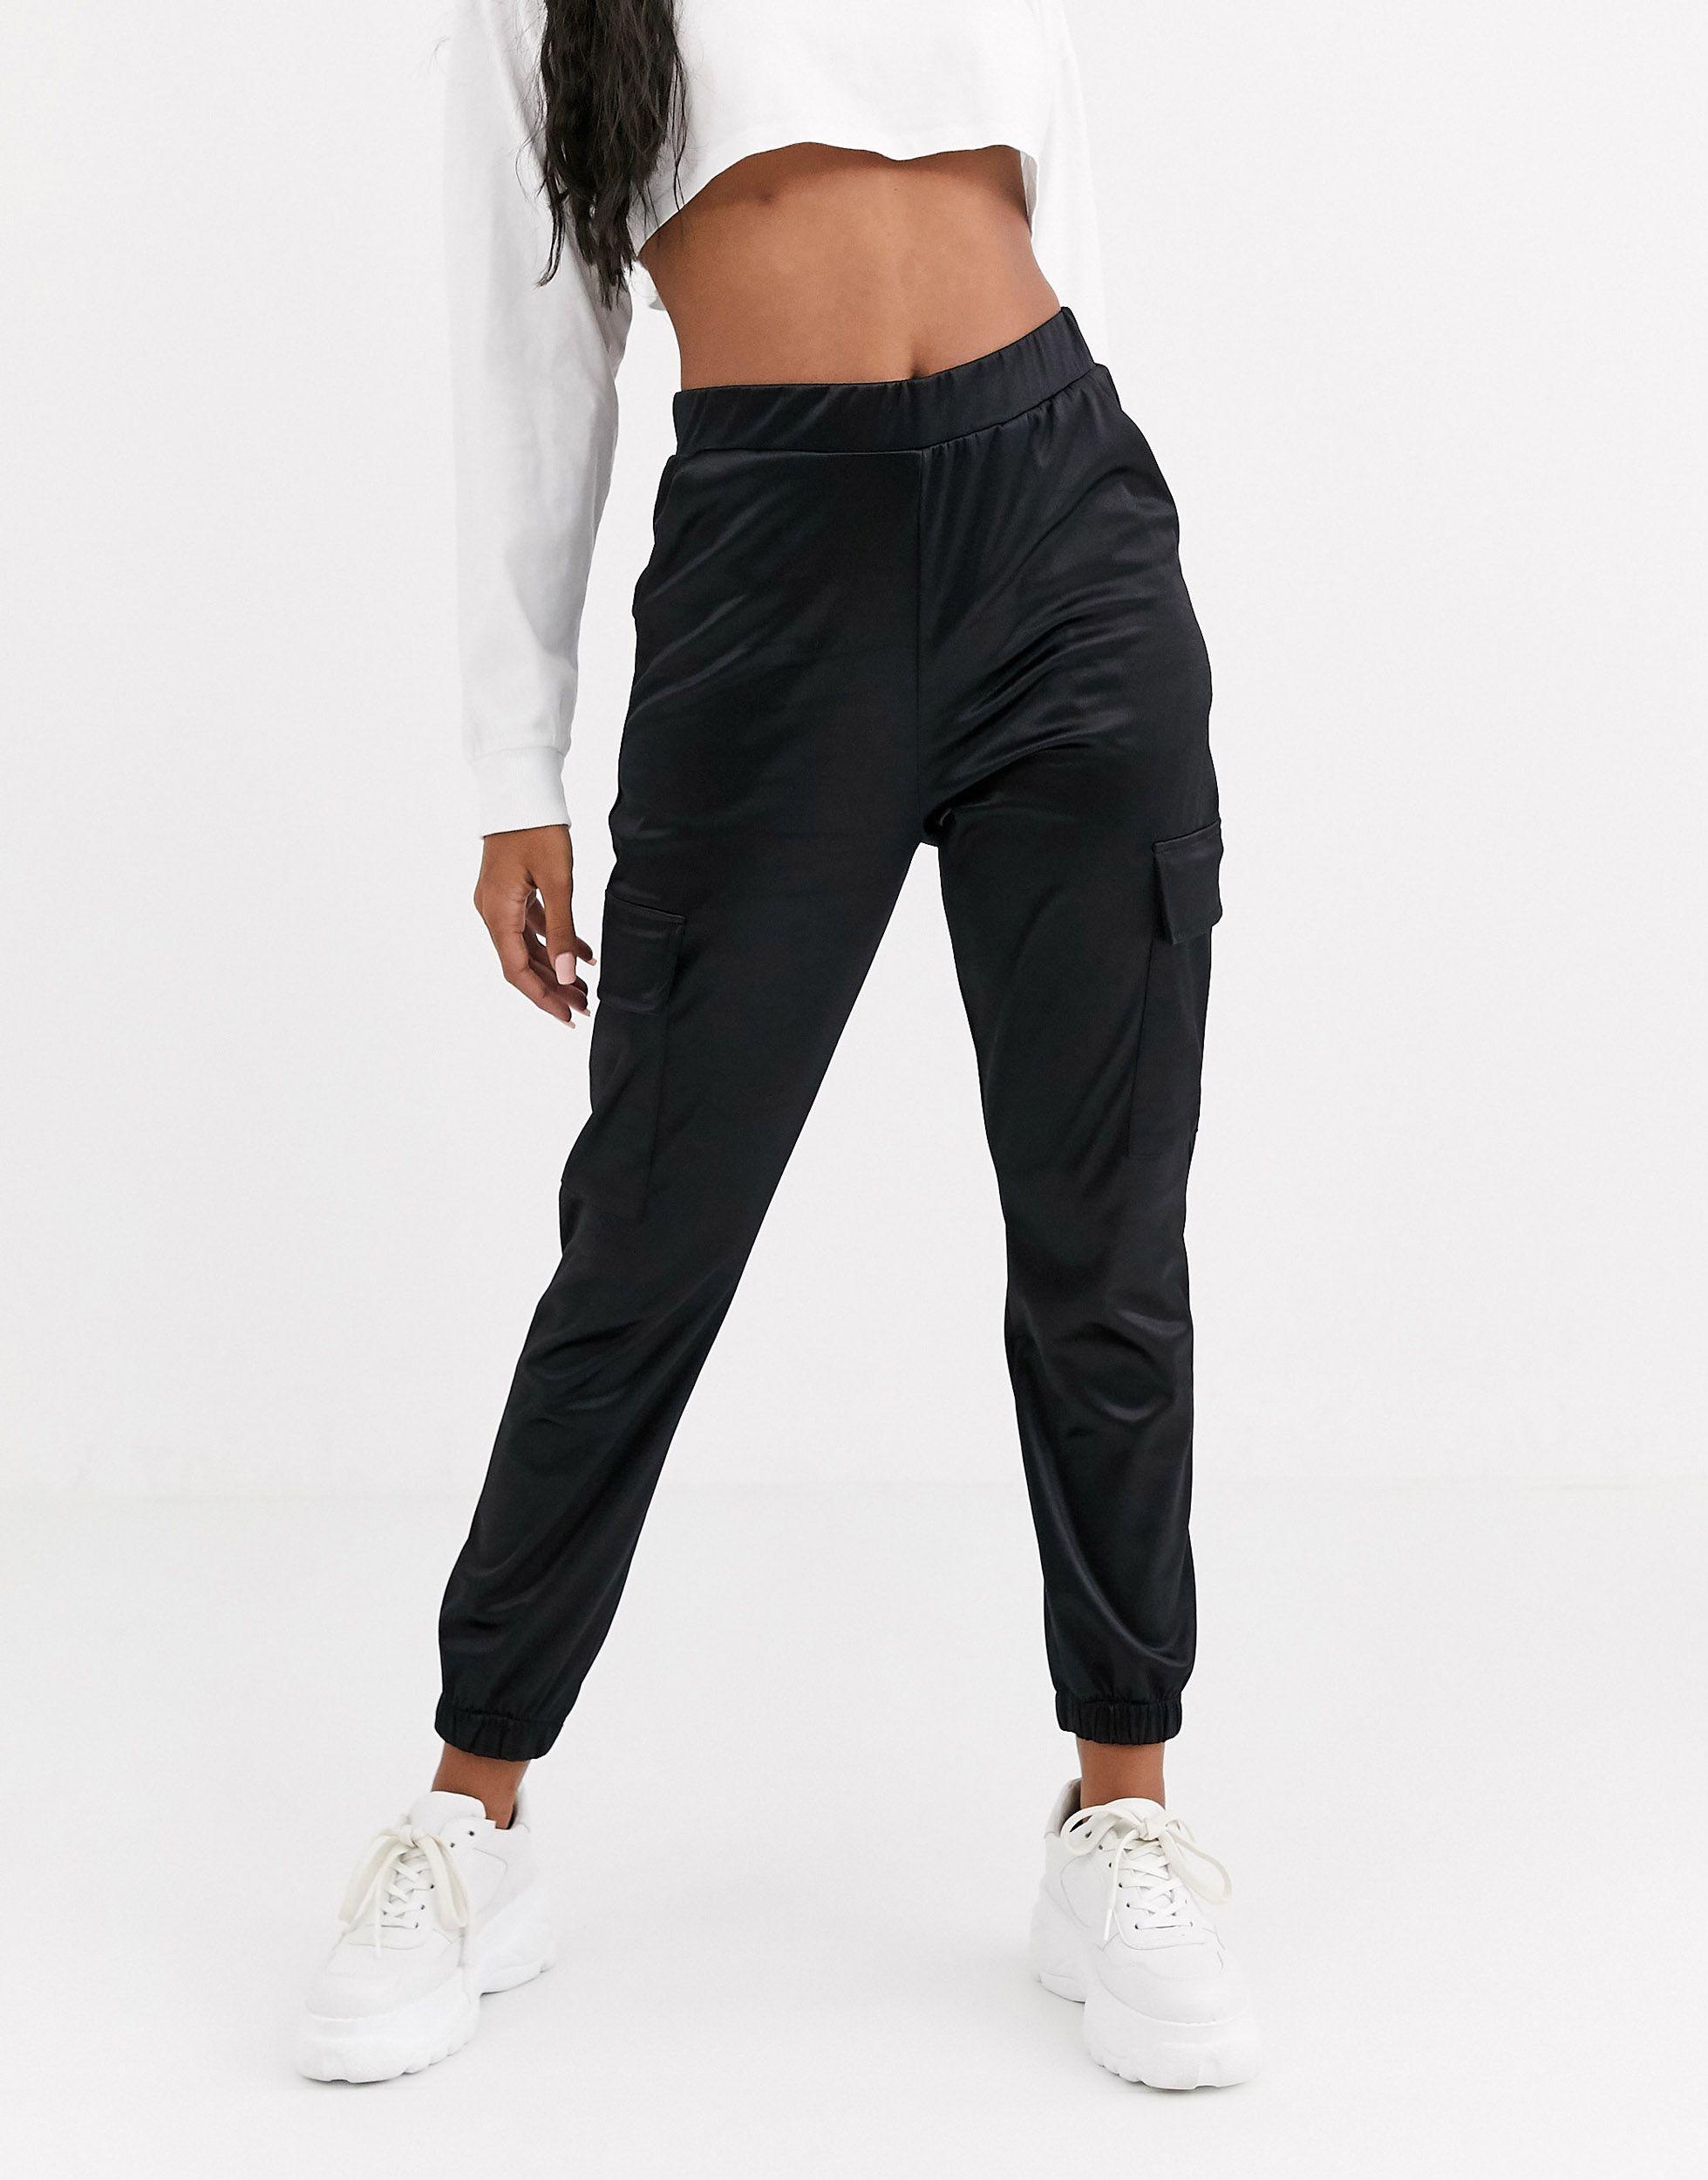 ASOS Satin jogger With Pockets in Black - Lyst